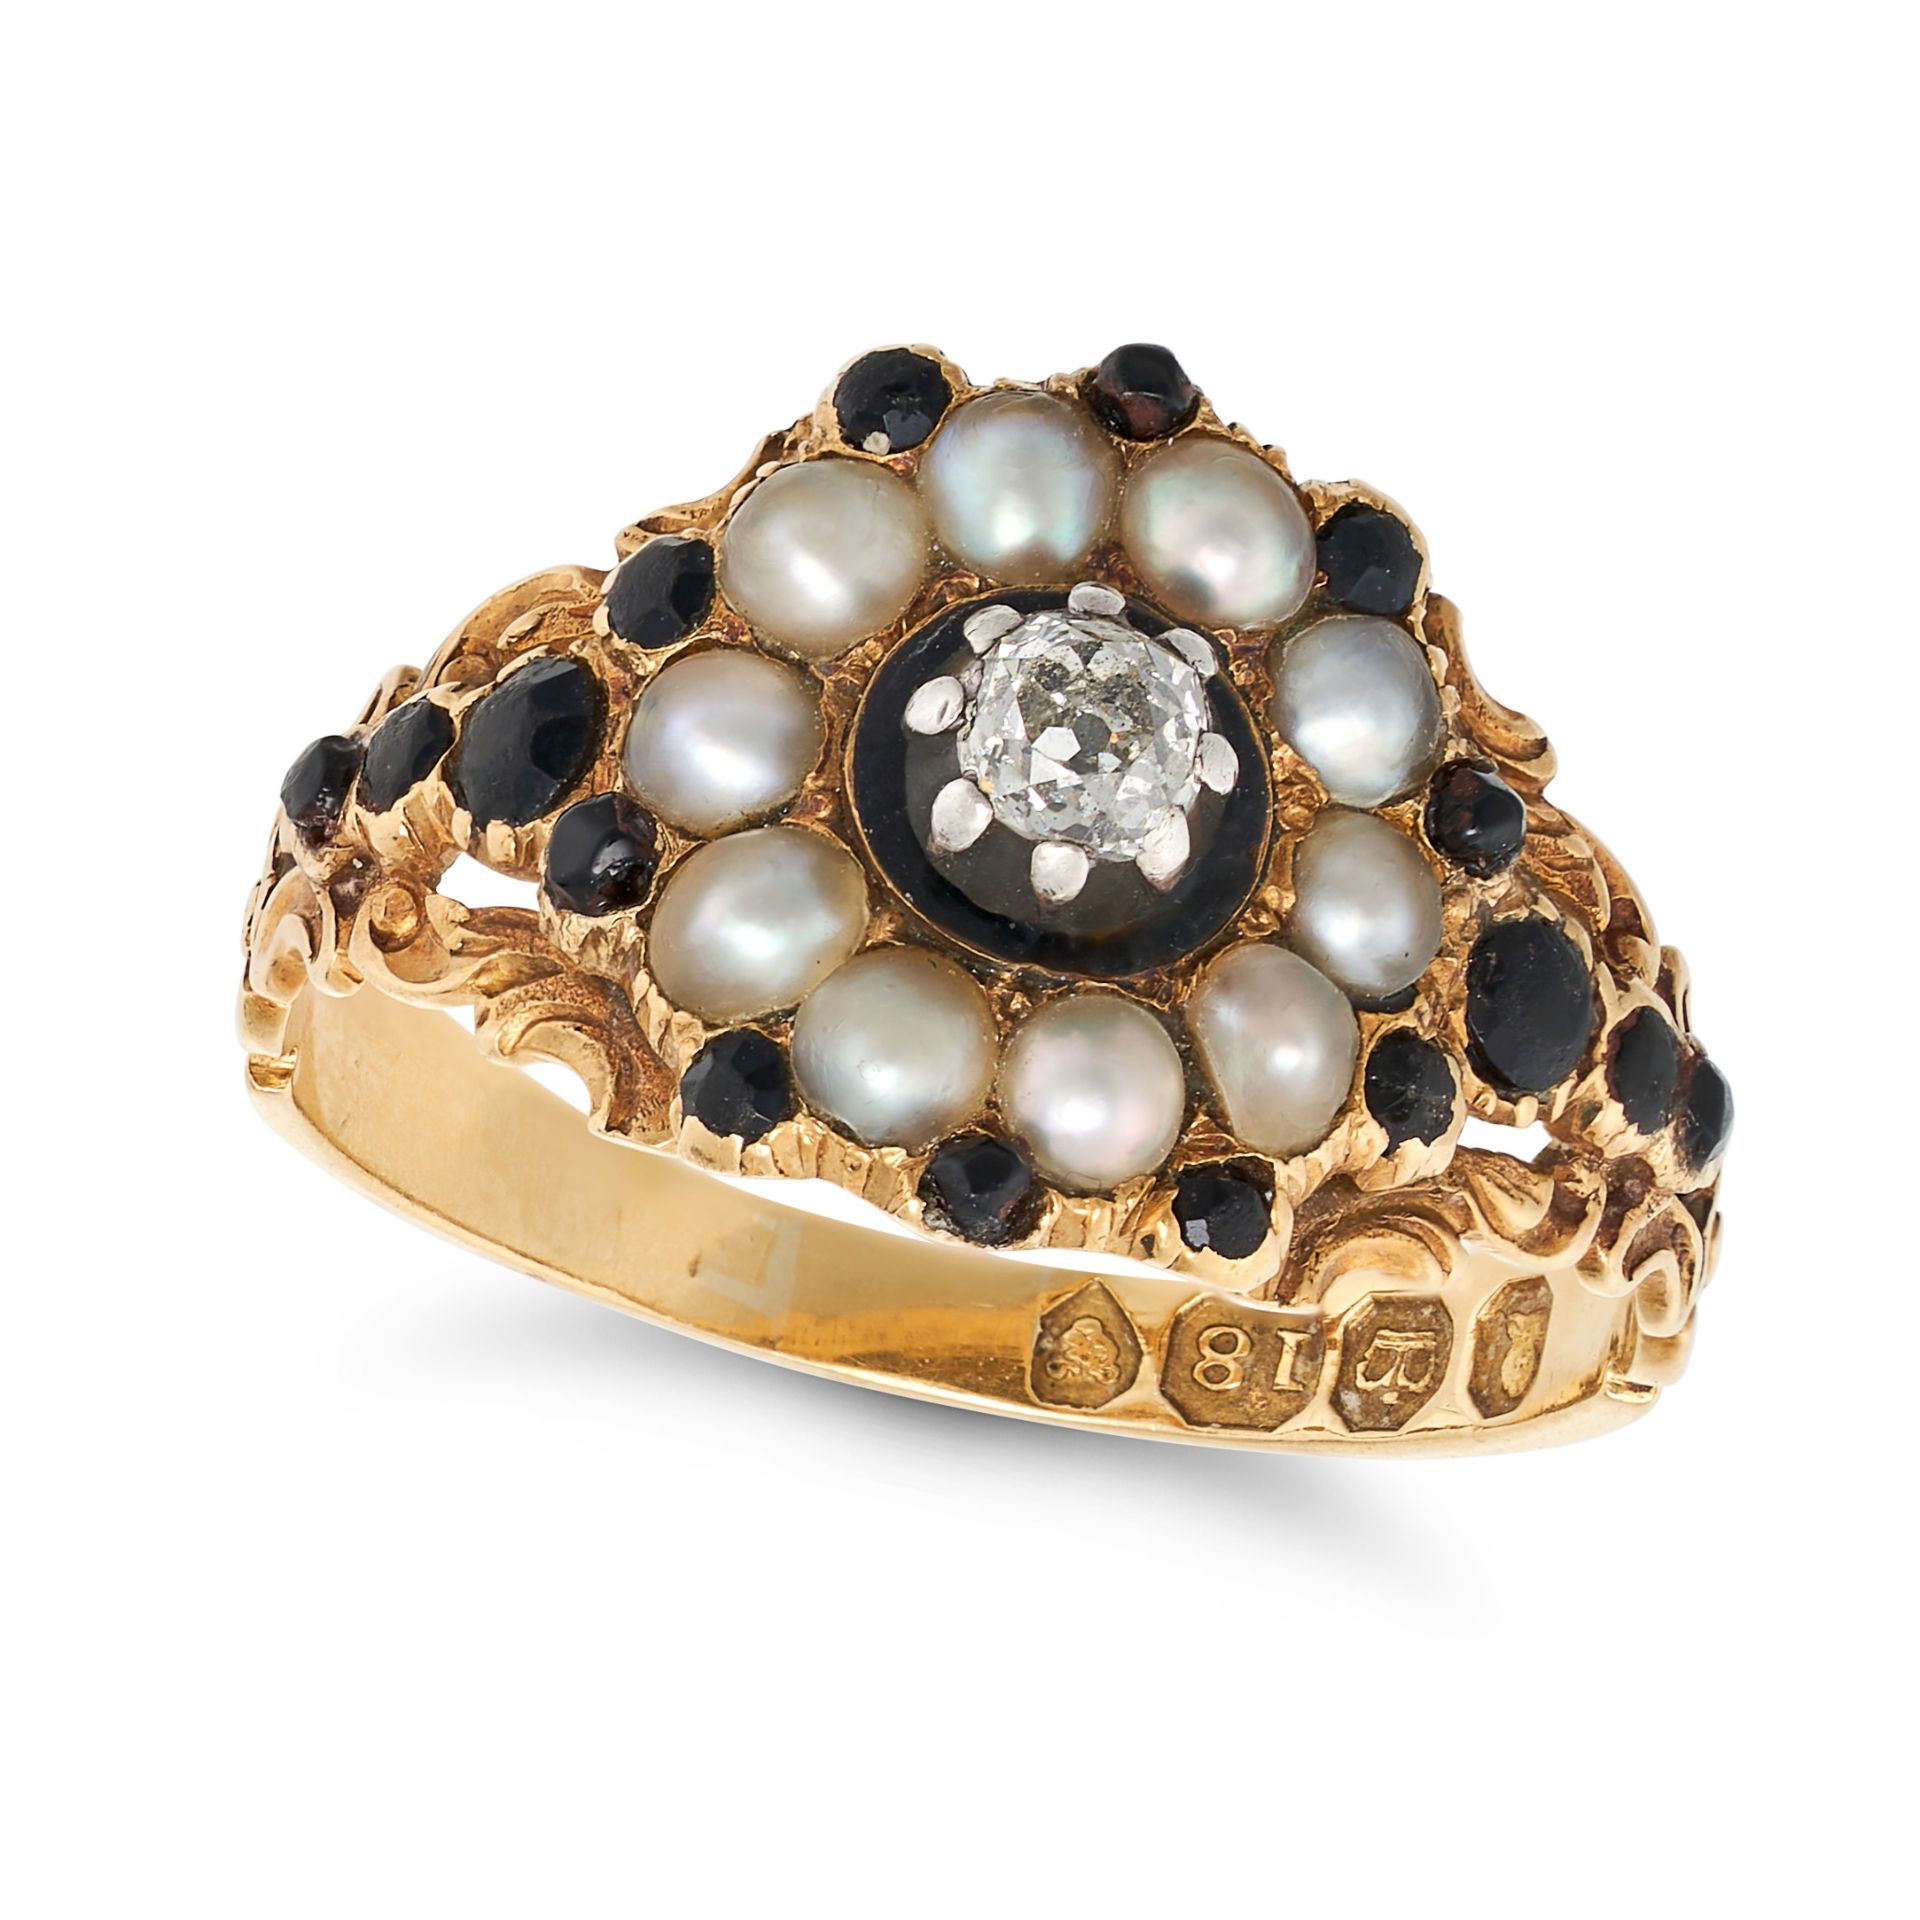 AN ANTIQUE GEORGIAN PEARL, JET AND DIAMOND MOURNING RING in 18ct yellow gold, set with an old cut...